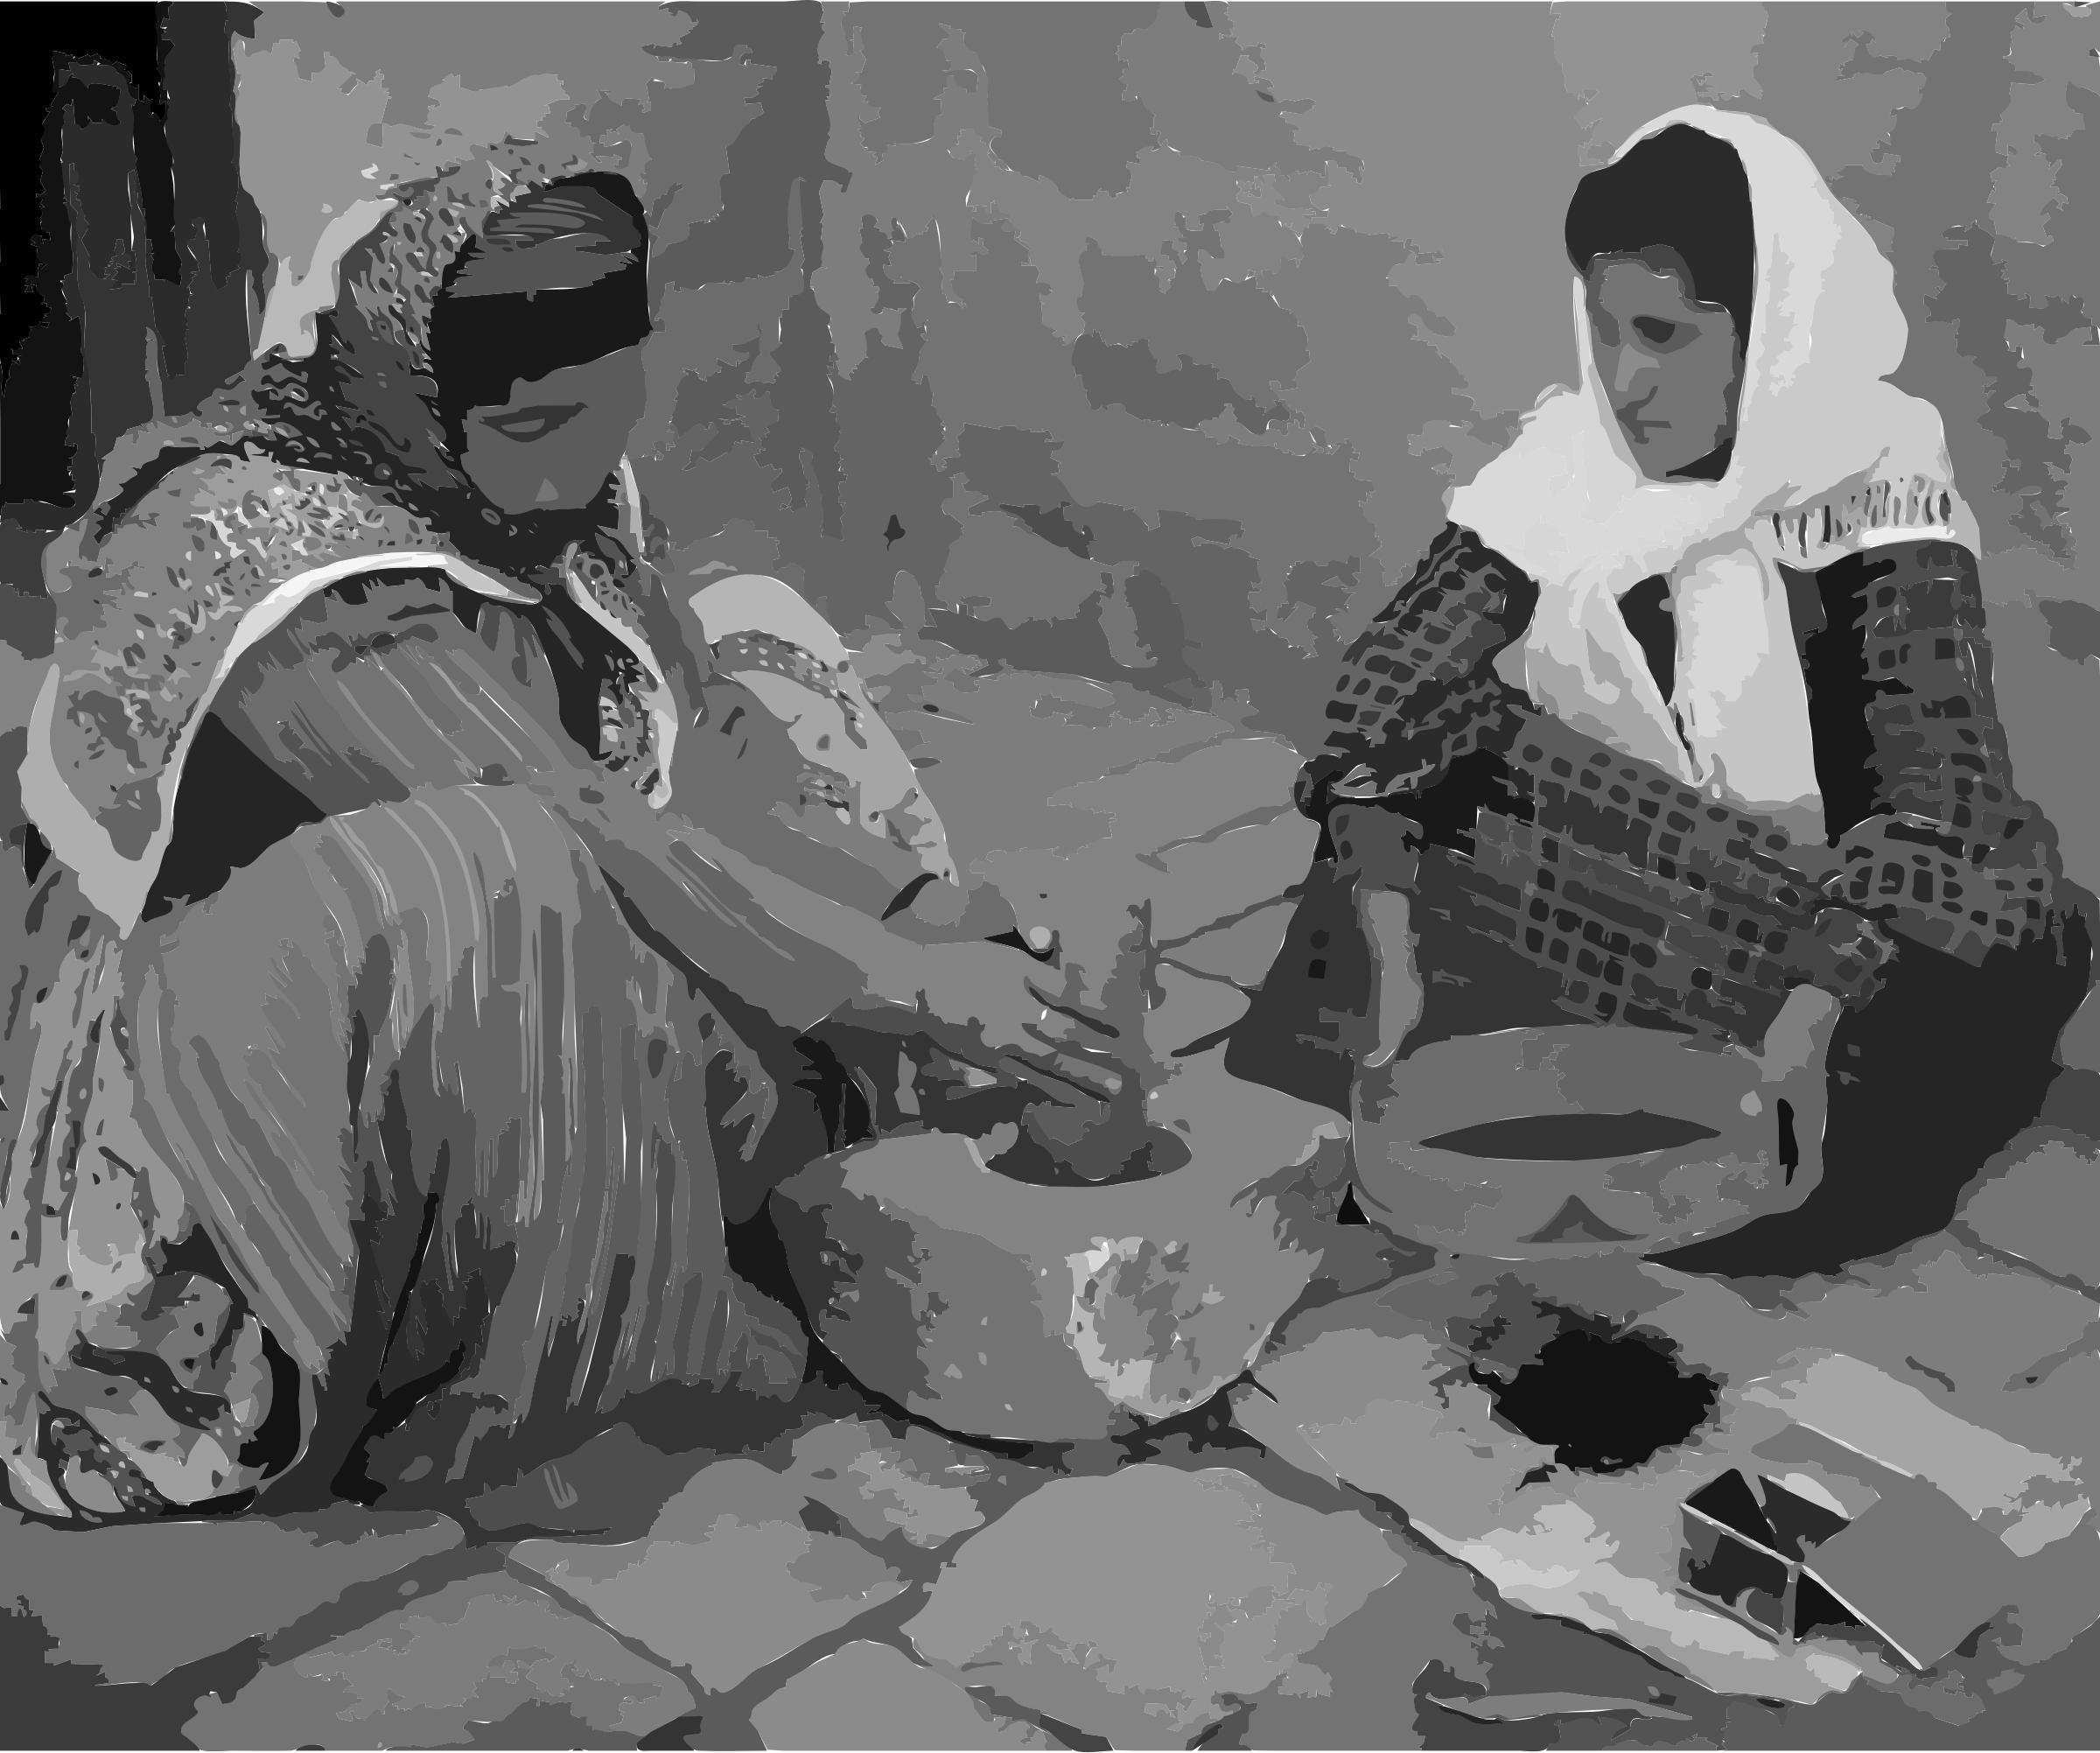 Palestinian women grinding coffee beans png